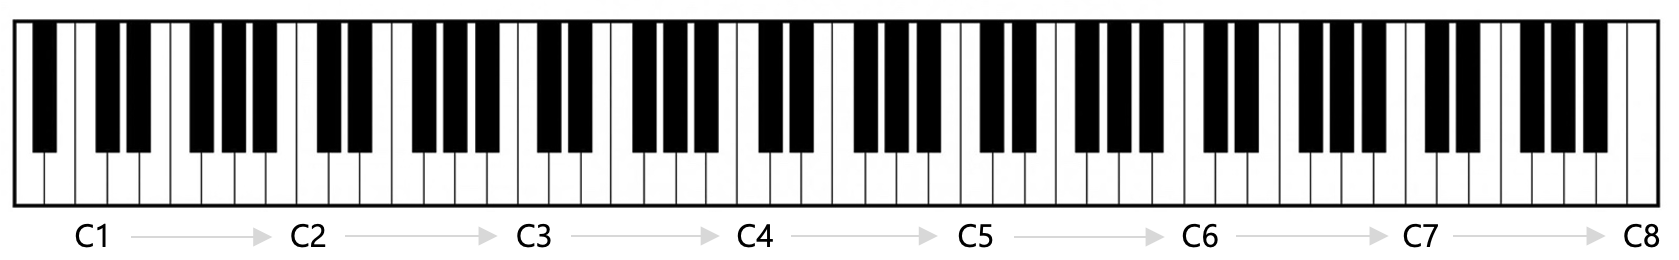 octave registers on the piano